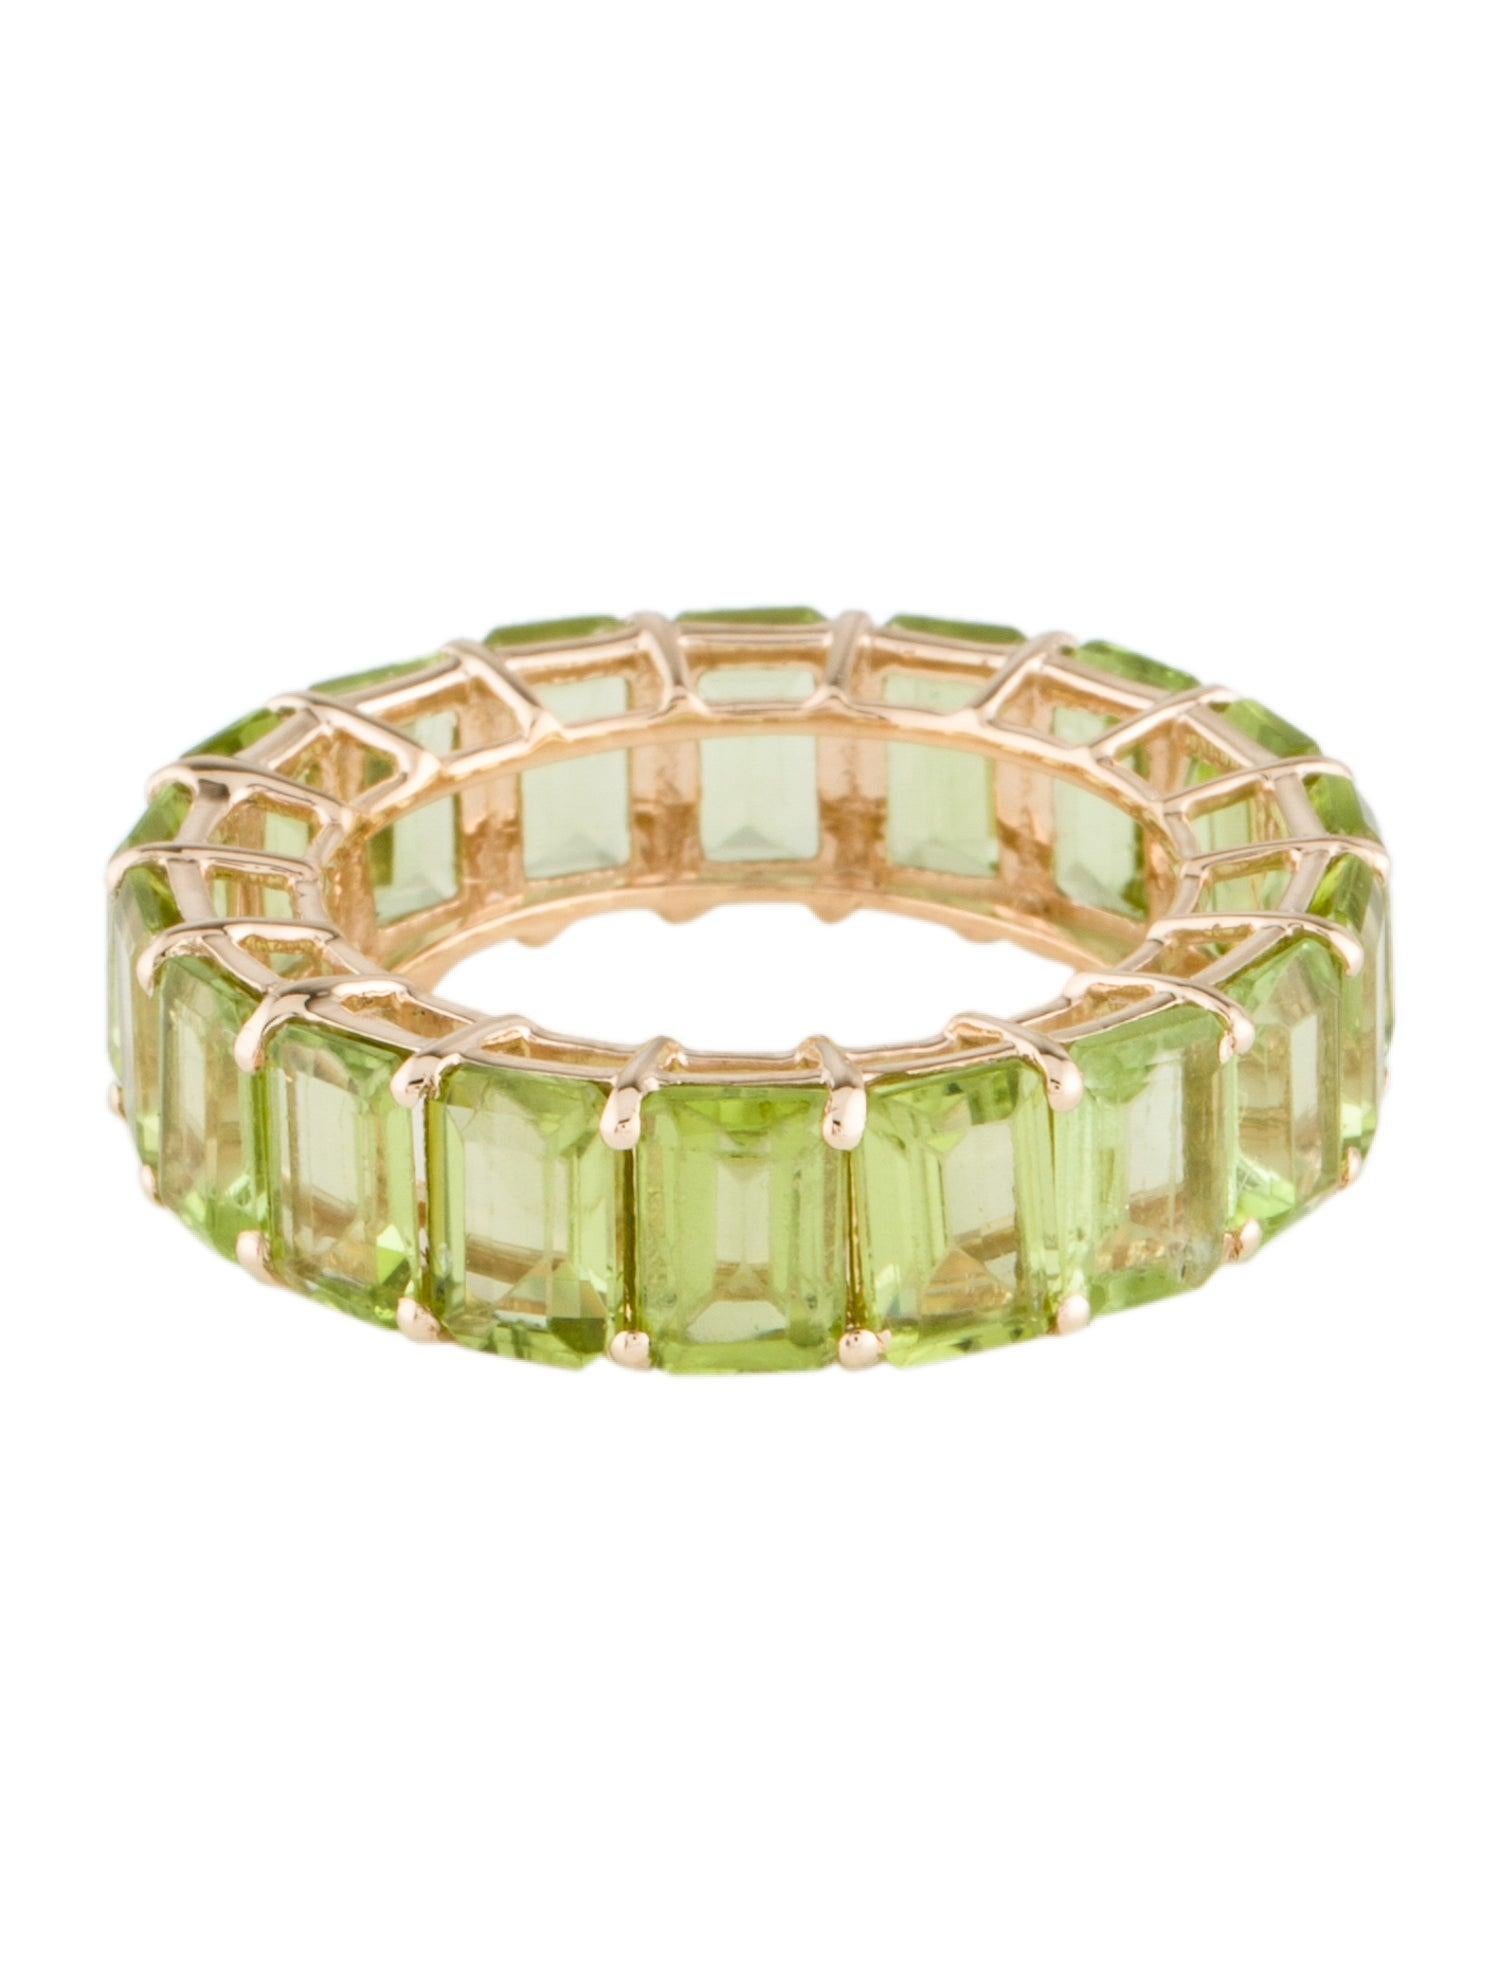 14K Yellow Gold Peridot Eternity Band, Size 7 - Rectangular Step Cut Green Perid In New Condition For Sale In Holtsville, NY